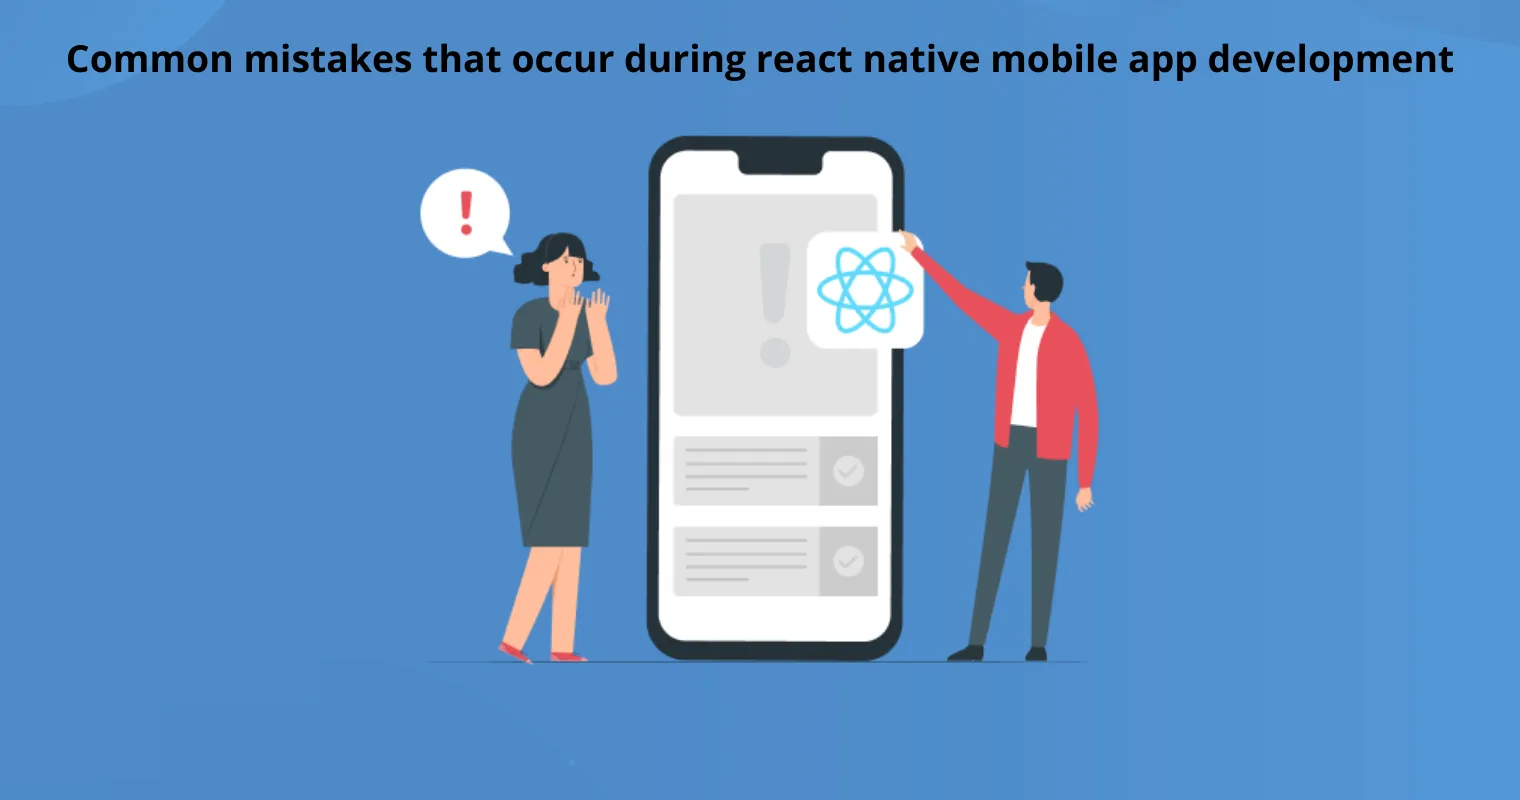 Common mistakes to avoid during reactive native app development 